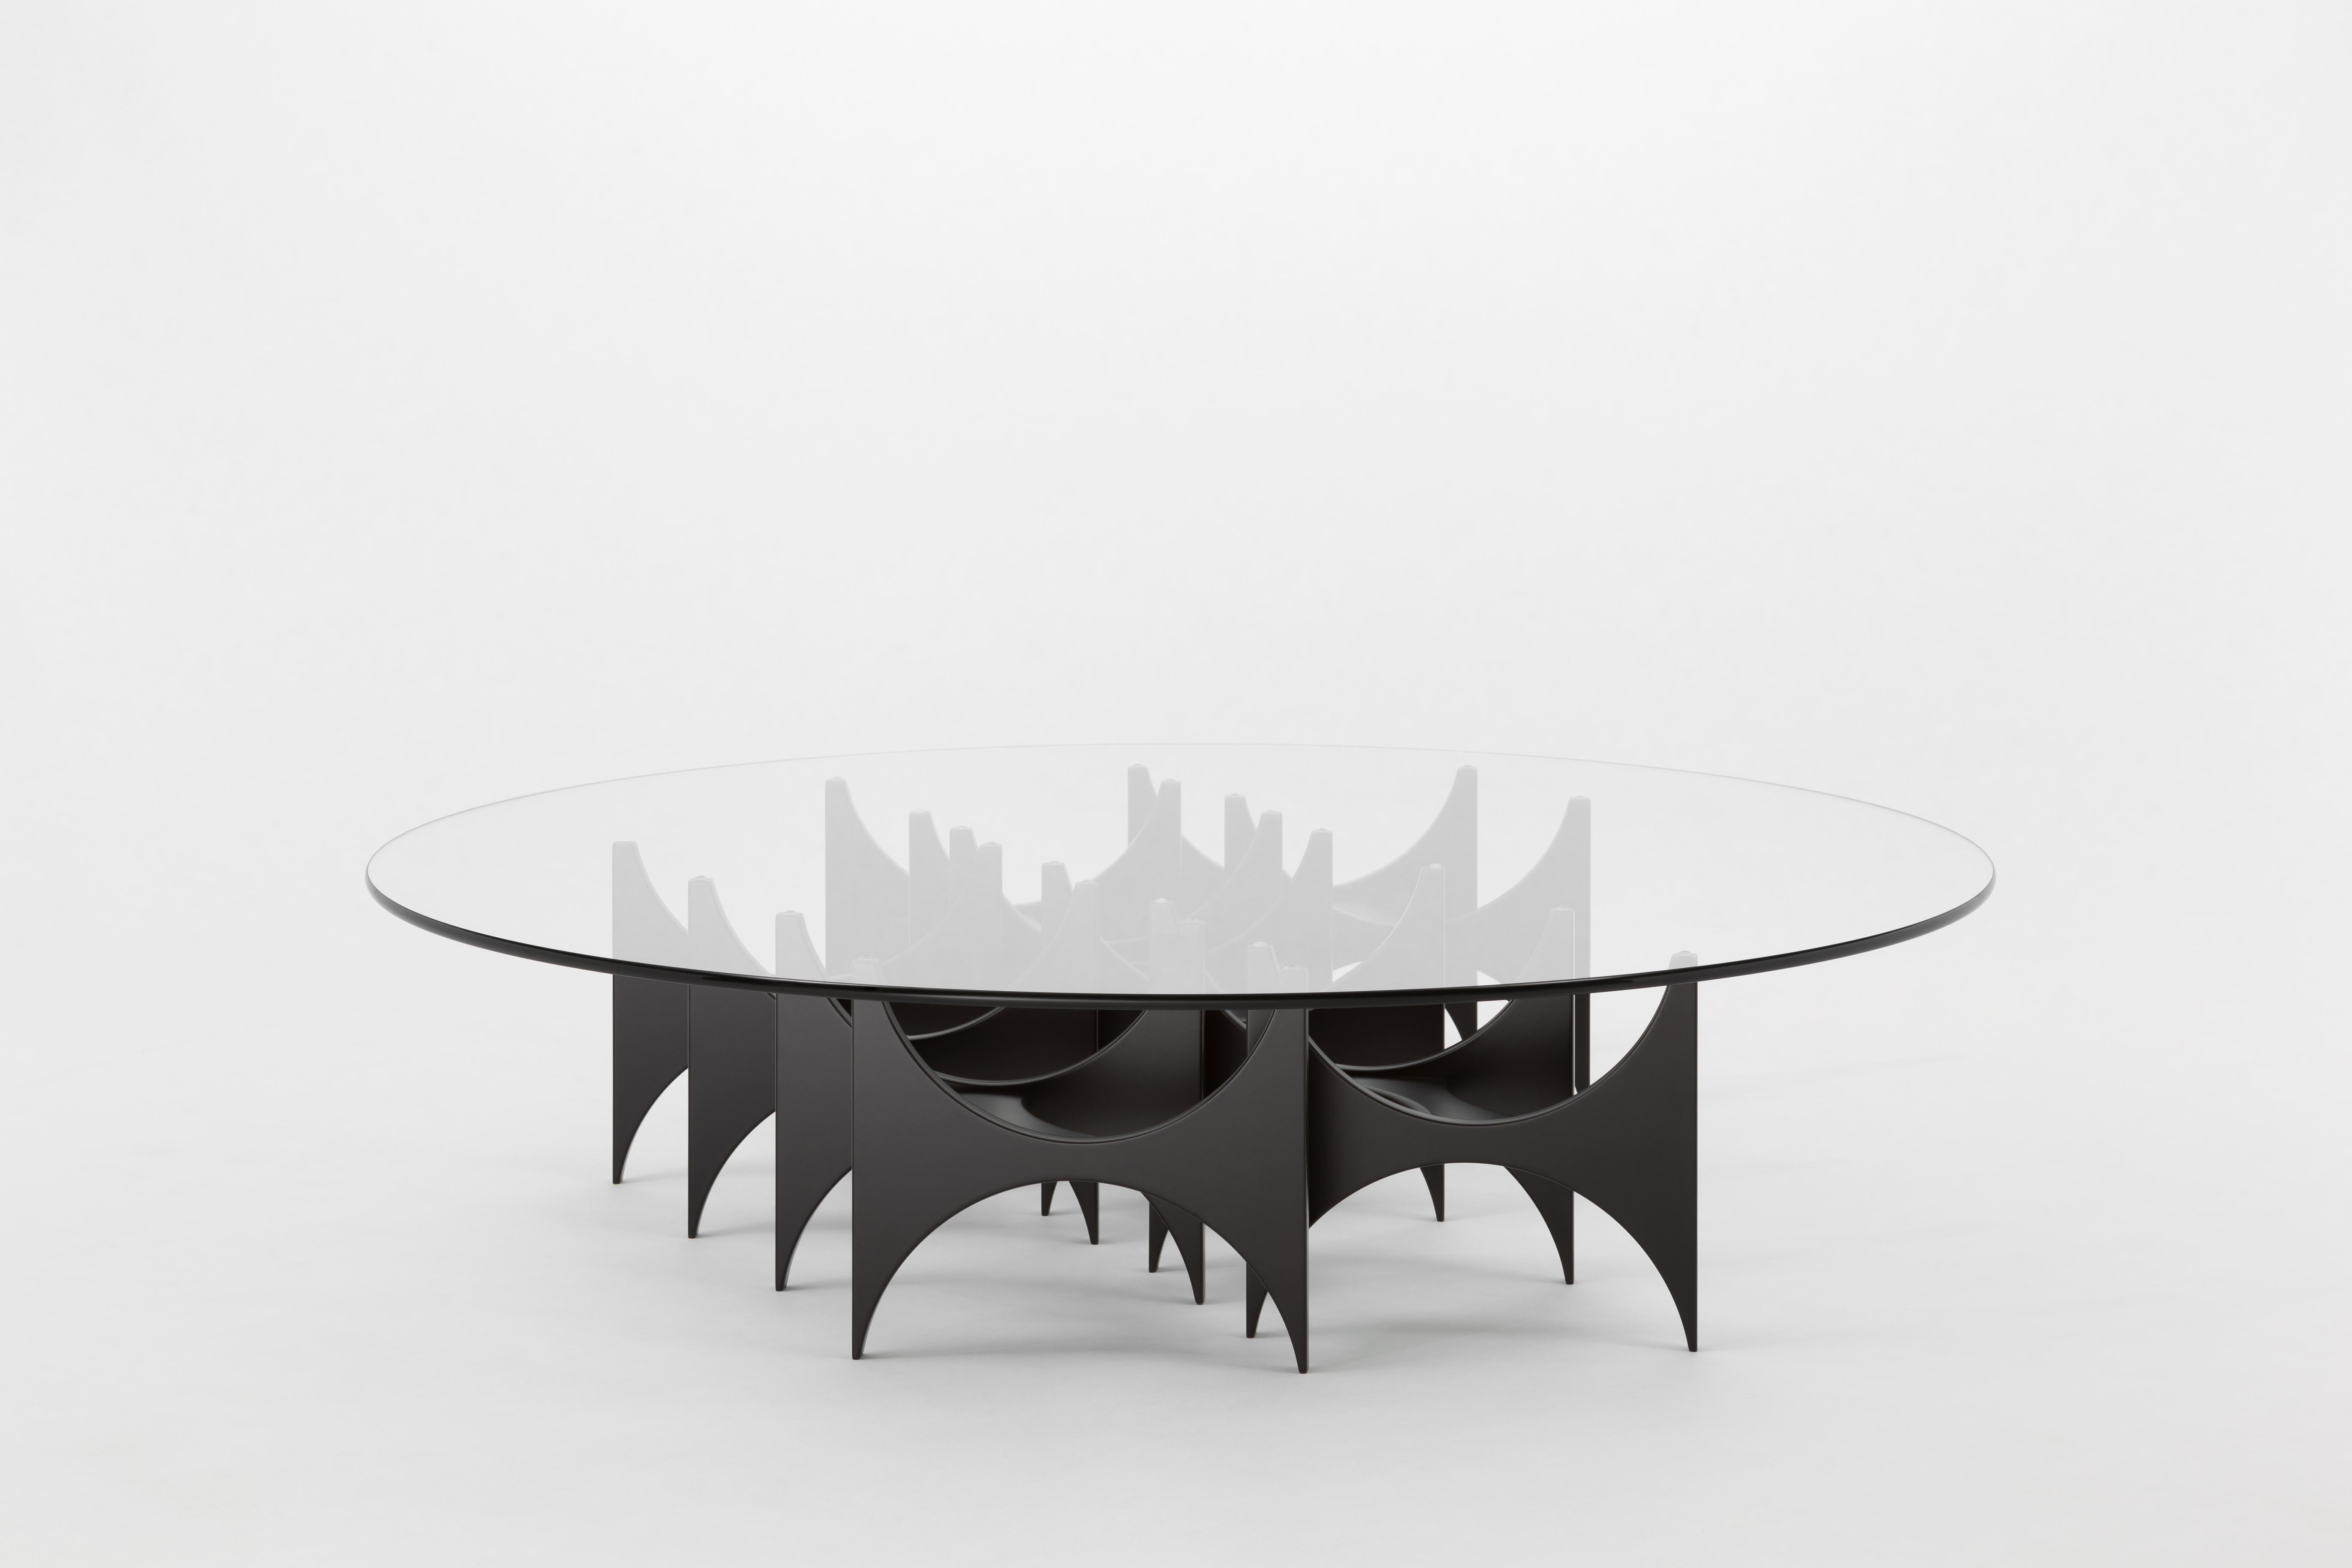 Butterfly round coffee table by SEM
Dimensions: D140x H31.2 cm
Material: Glossy lacquered finish.
Costumized sizes, colors and top available on request. Available in all RAL color. Top in extralight glass.

The 'Butterfly' coffee table is also